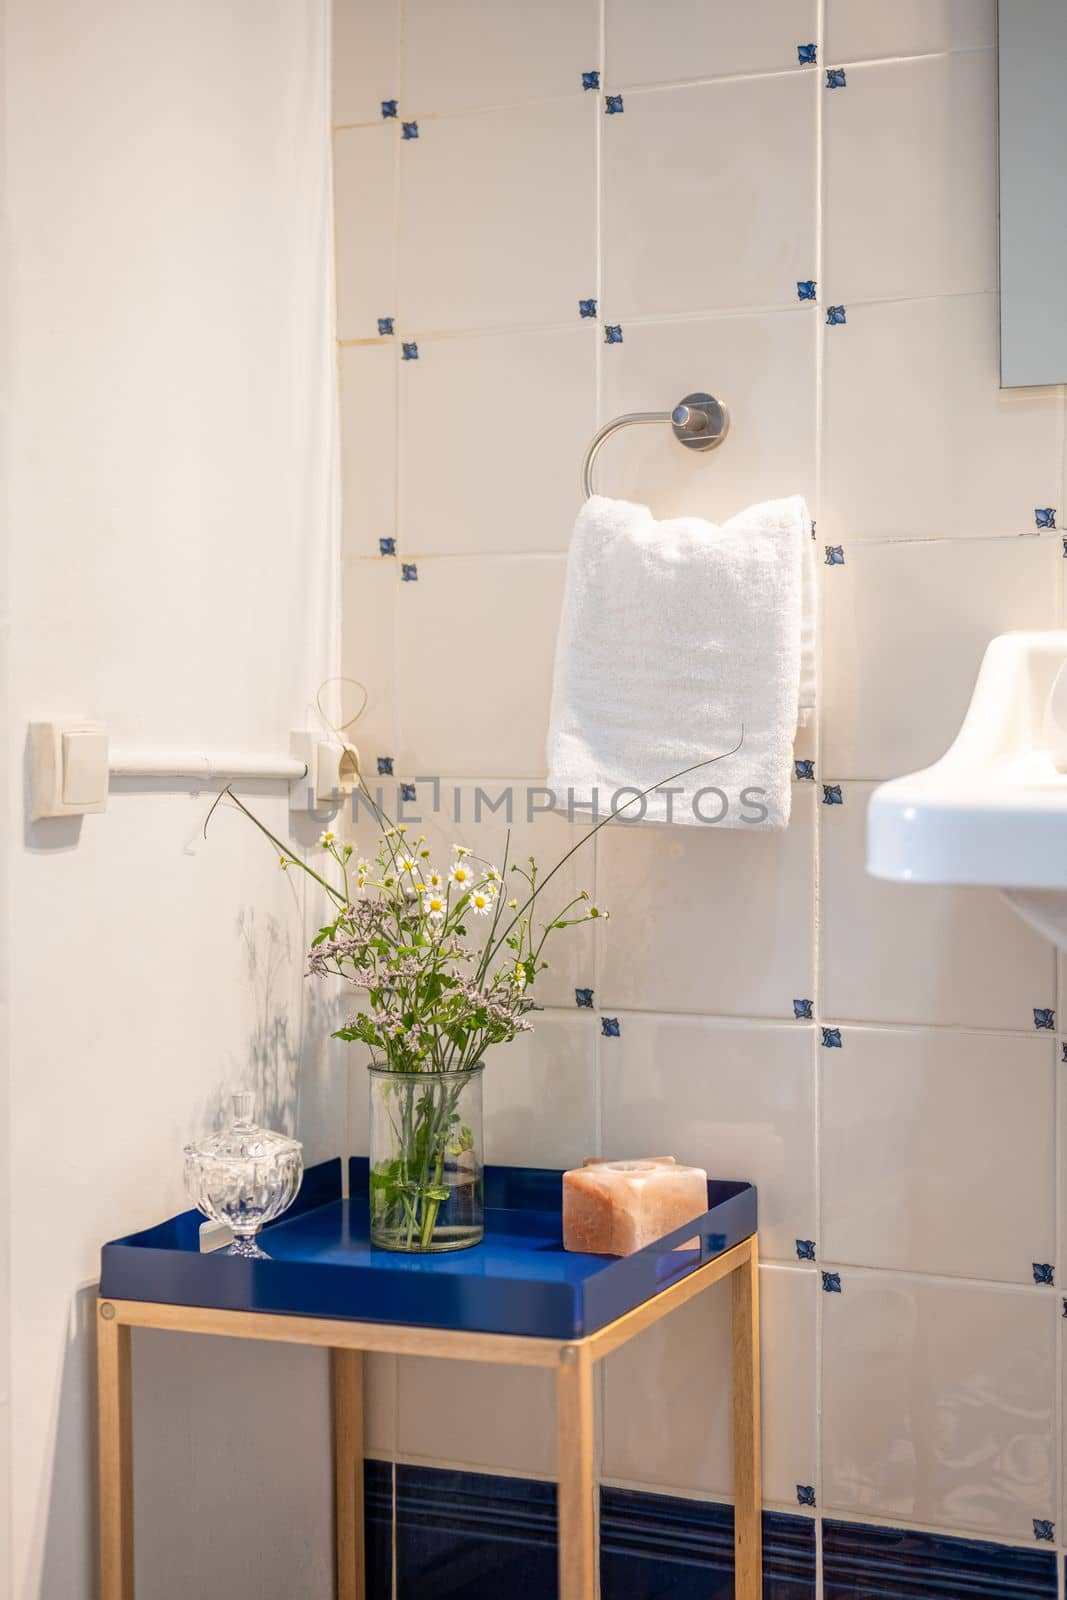 Corner of a bathroom with a decorative low decorative table with a blue base. On the table is a vase with wild flowers. On a tiled wall is a holder with a white terry towel. by apavlin